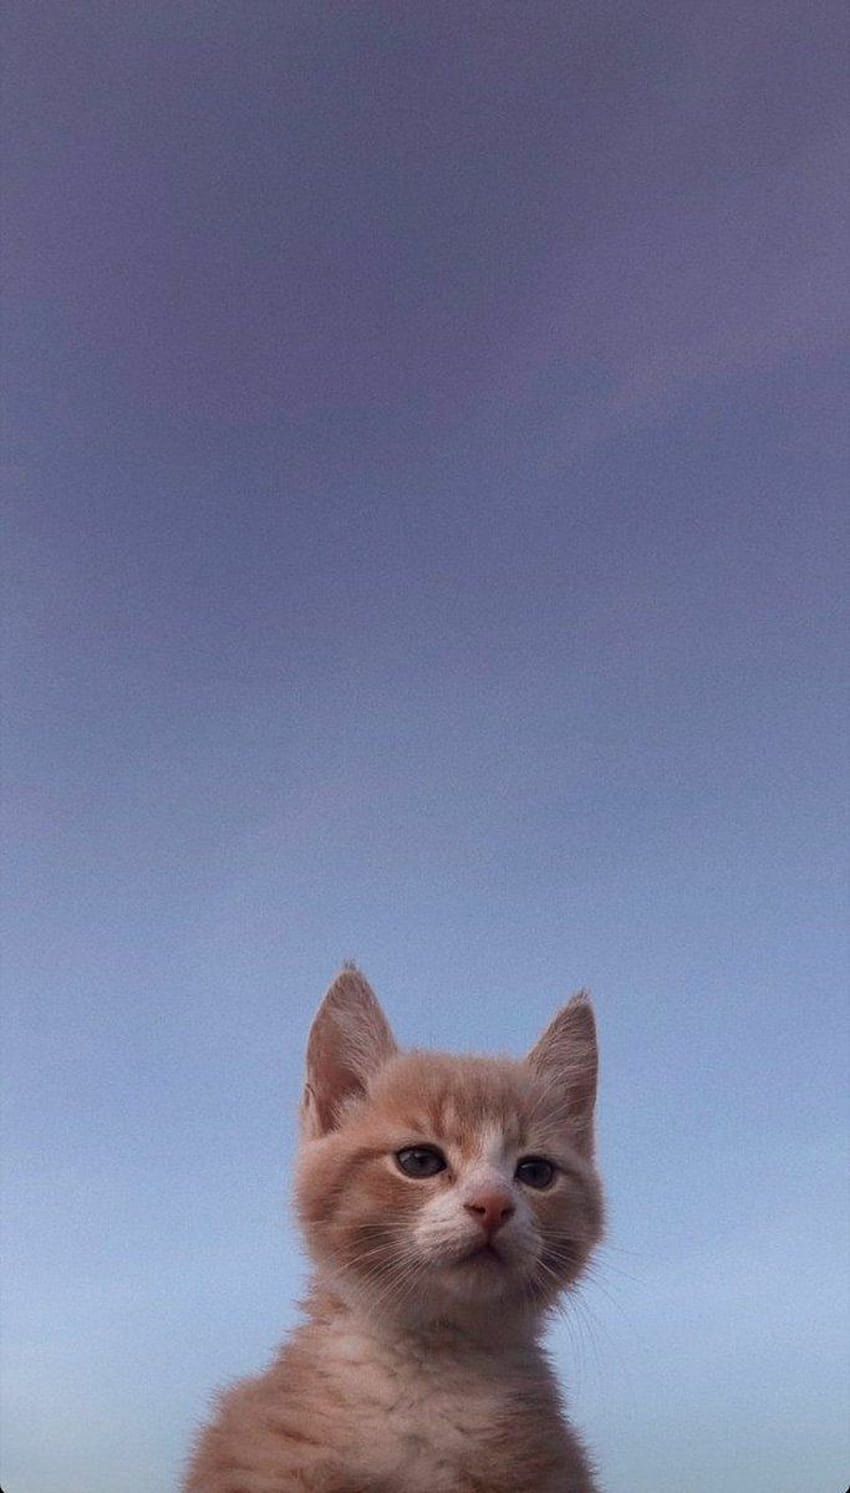 A cat sitting on the ground looking up - Cat